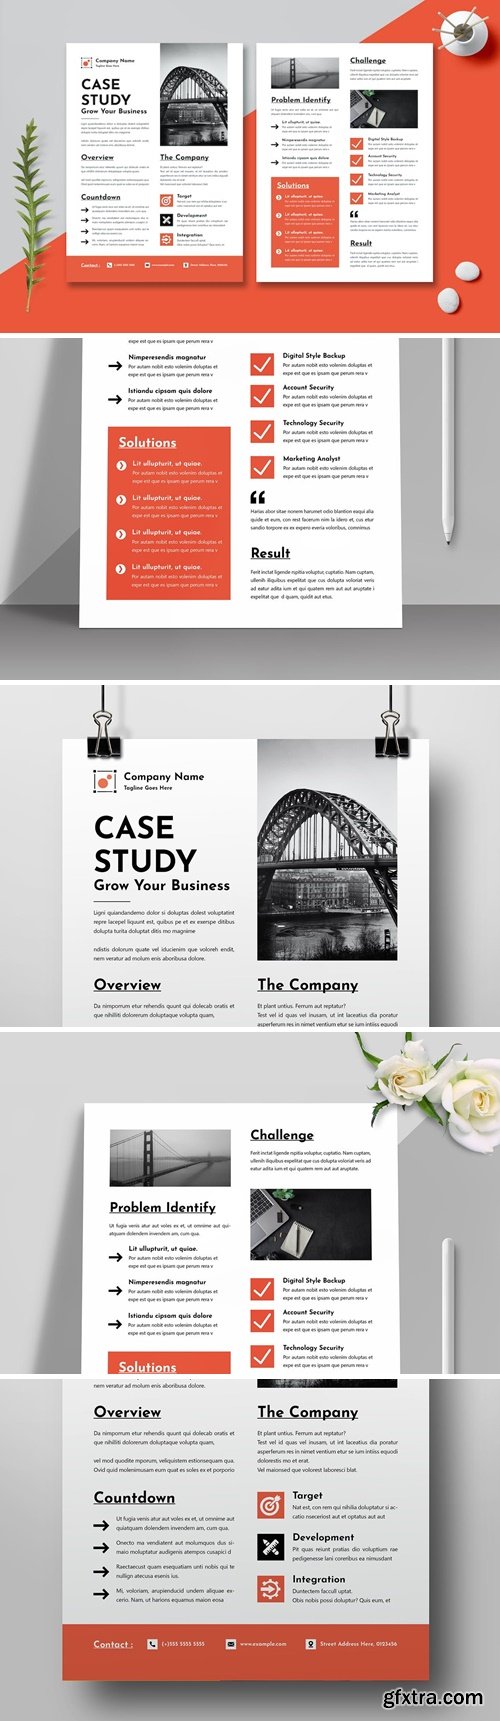 Case Study Template 3ADUSET